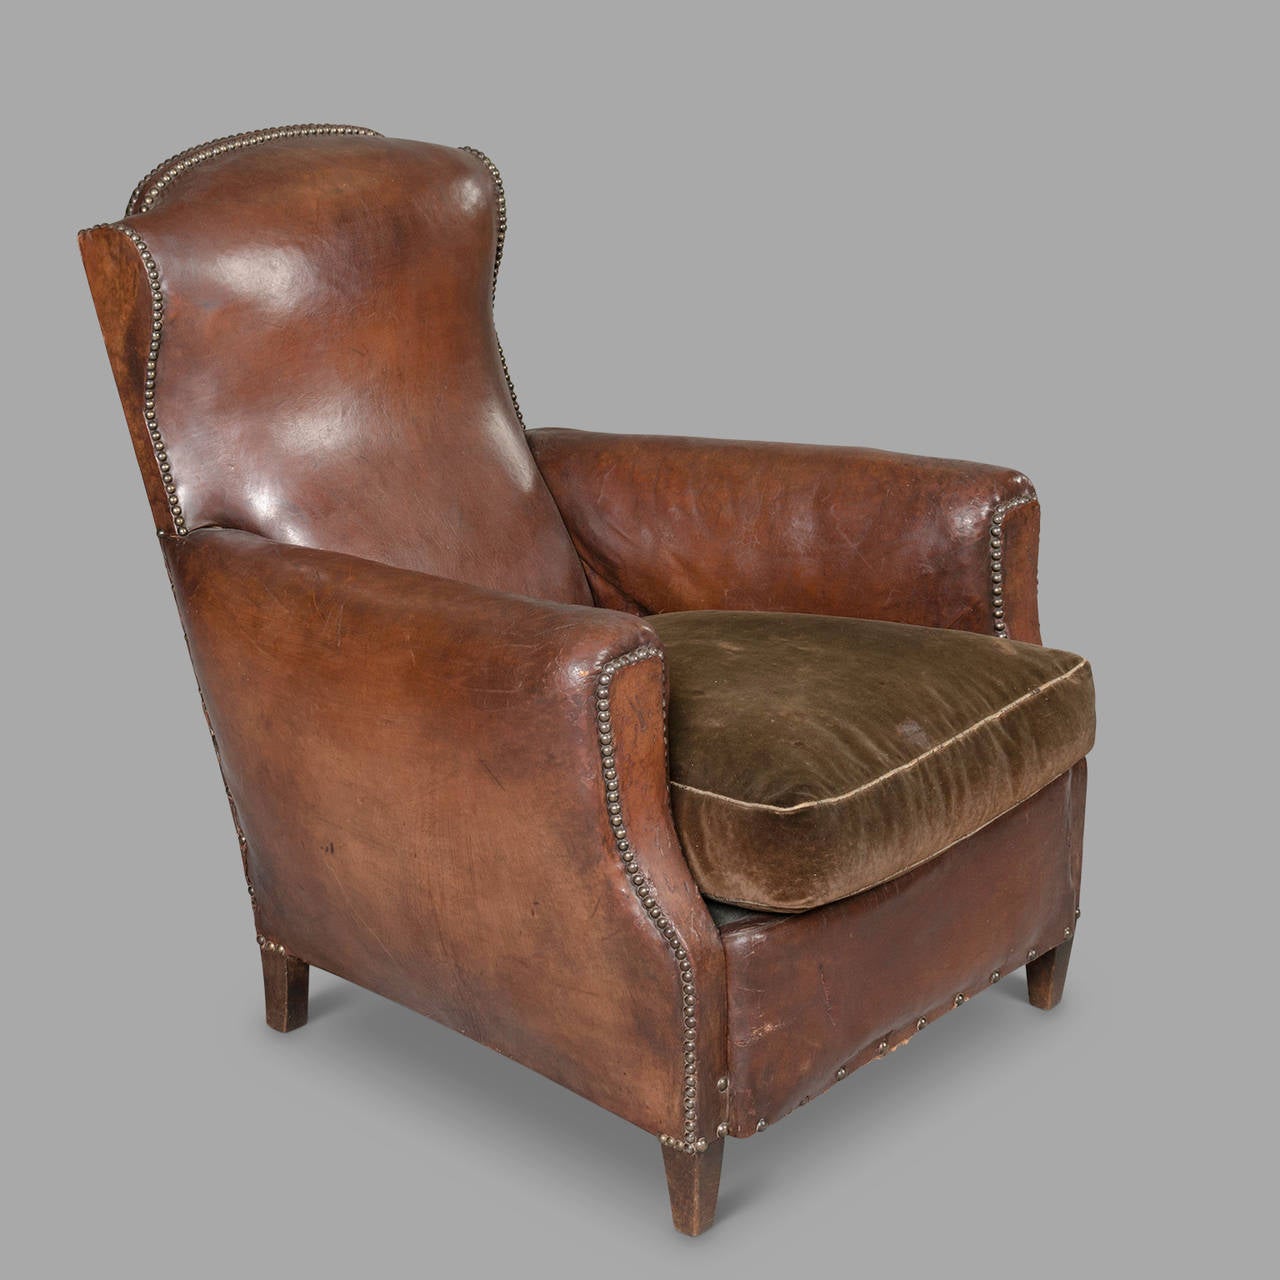 Very nice shape for this club armchair with its original velvet cushion. Leather patina highly enhanced by the time. 

The chaise longue has a reclining back with an embedded system and operable by a pulling handle. Beautiful time patina as well.